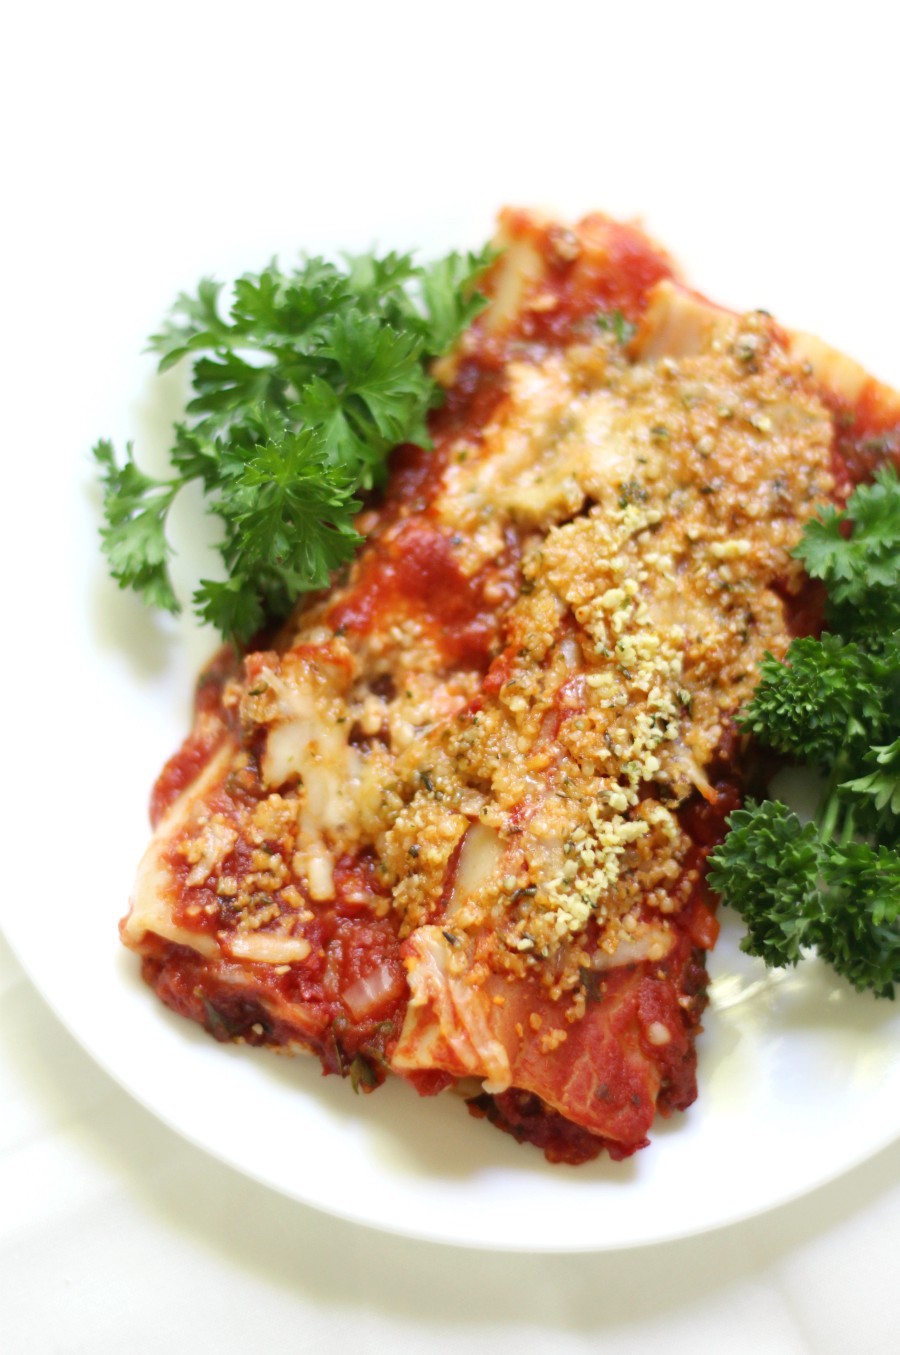 Classic Baked Gluten-Free + Vegan Manicotti (Soy-Free) | Strength and Sunshine @RebeccaGF666 No more missing out on your Italian favorite! A Classic Baked Gluten-Free & Vegan Manicotti recipe with homemade tomato sauce, a creamy dairy-free & soy-free cheesy filling, all topped with a homemade 2-ingredient "parmesan"! A perfect comfort food dinner the whole family will enjoy! #glutenfree #vegan #pasta #dinner #manicotti #dairyfree #soyfree #eggfree #glutenfreepasta